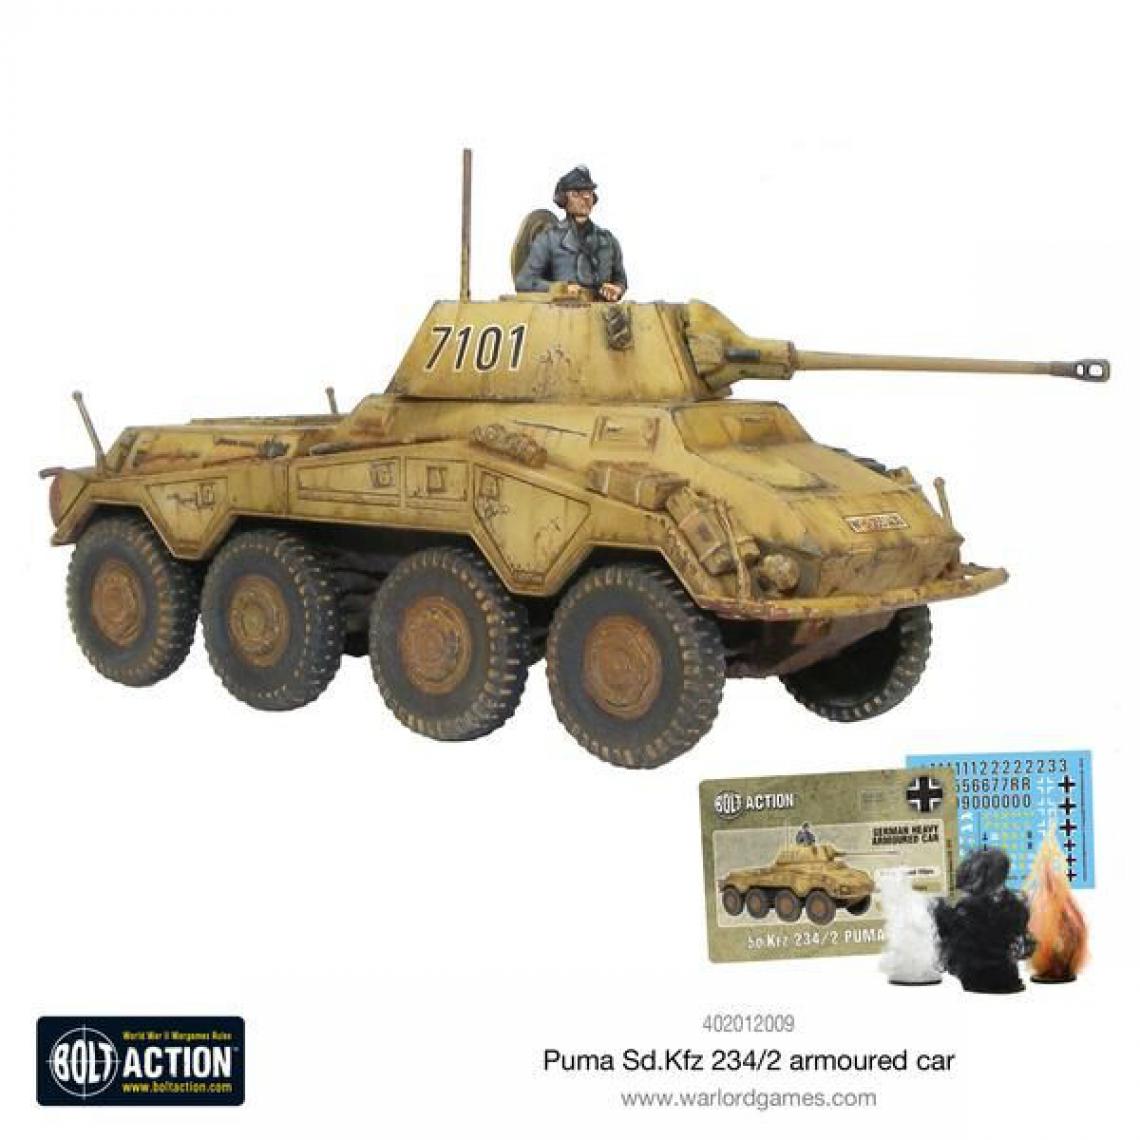 Warlord Games - Puma Sd.Kfz 234/2 Voiture blindée - Figurines militaires